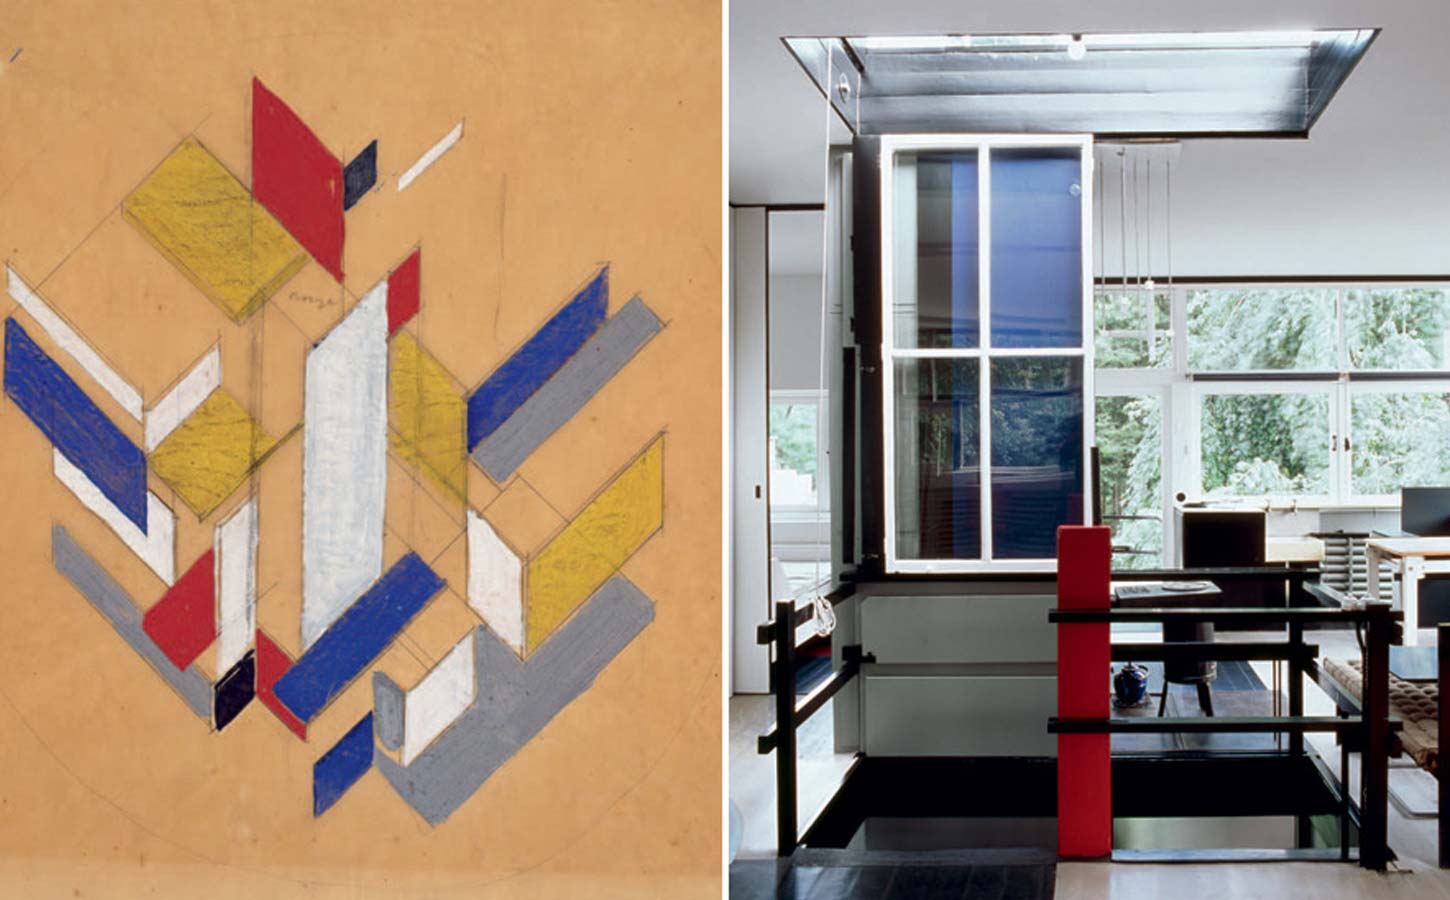 rietveld schroder house axonometric composition and interior view